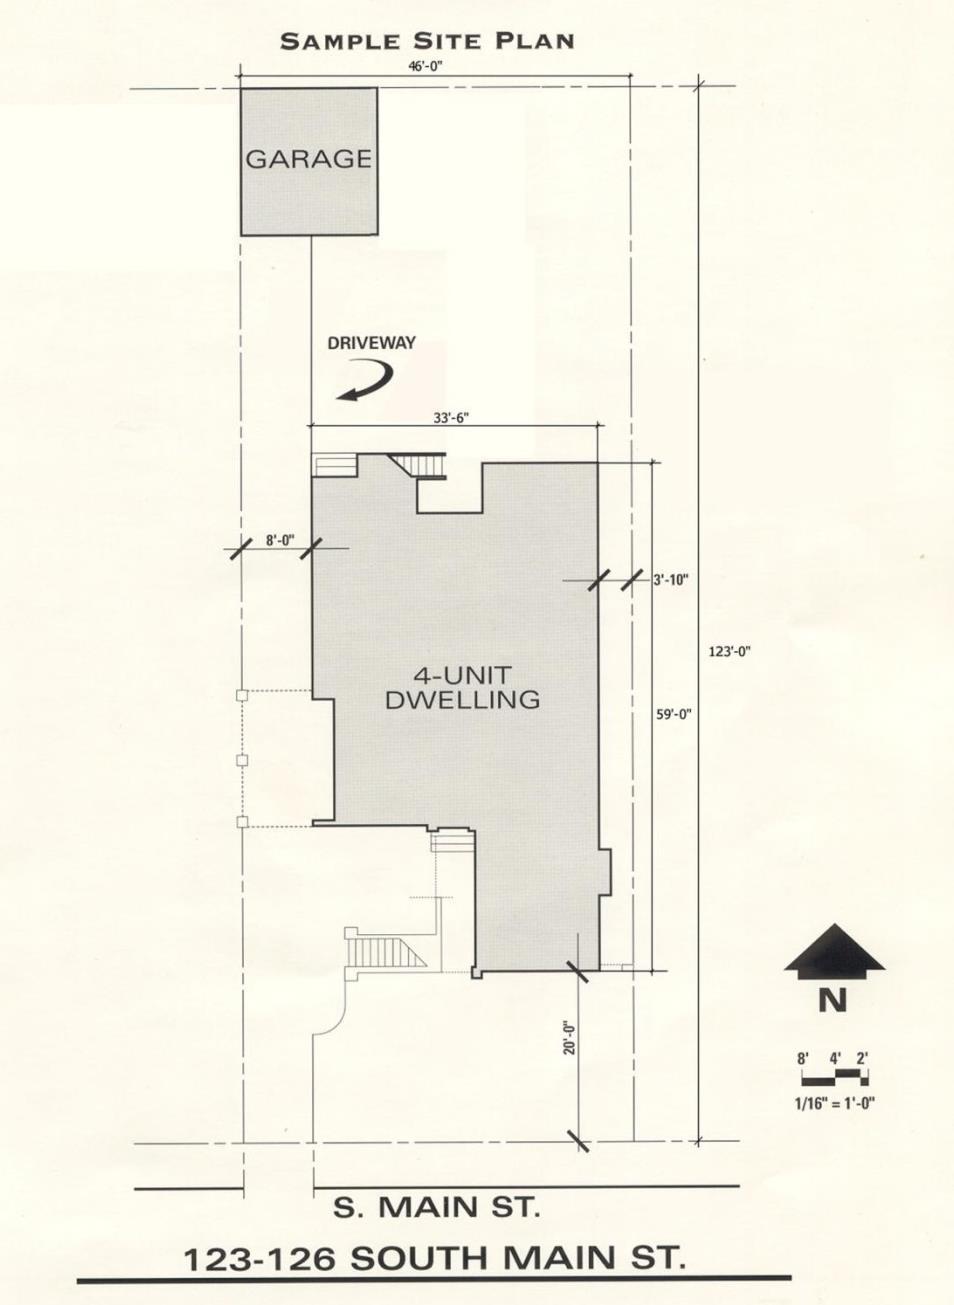 Attachments Site Plan 8 ½ x 11 inch site plan, drawn to scale locations of all